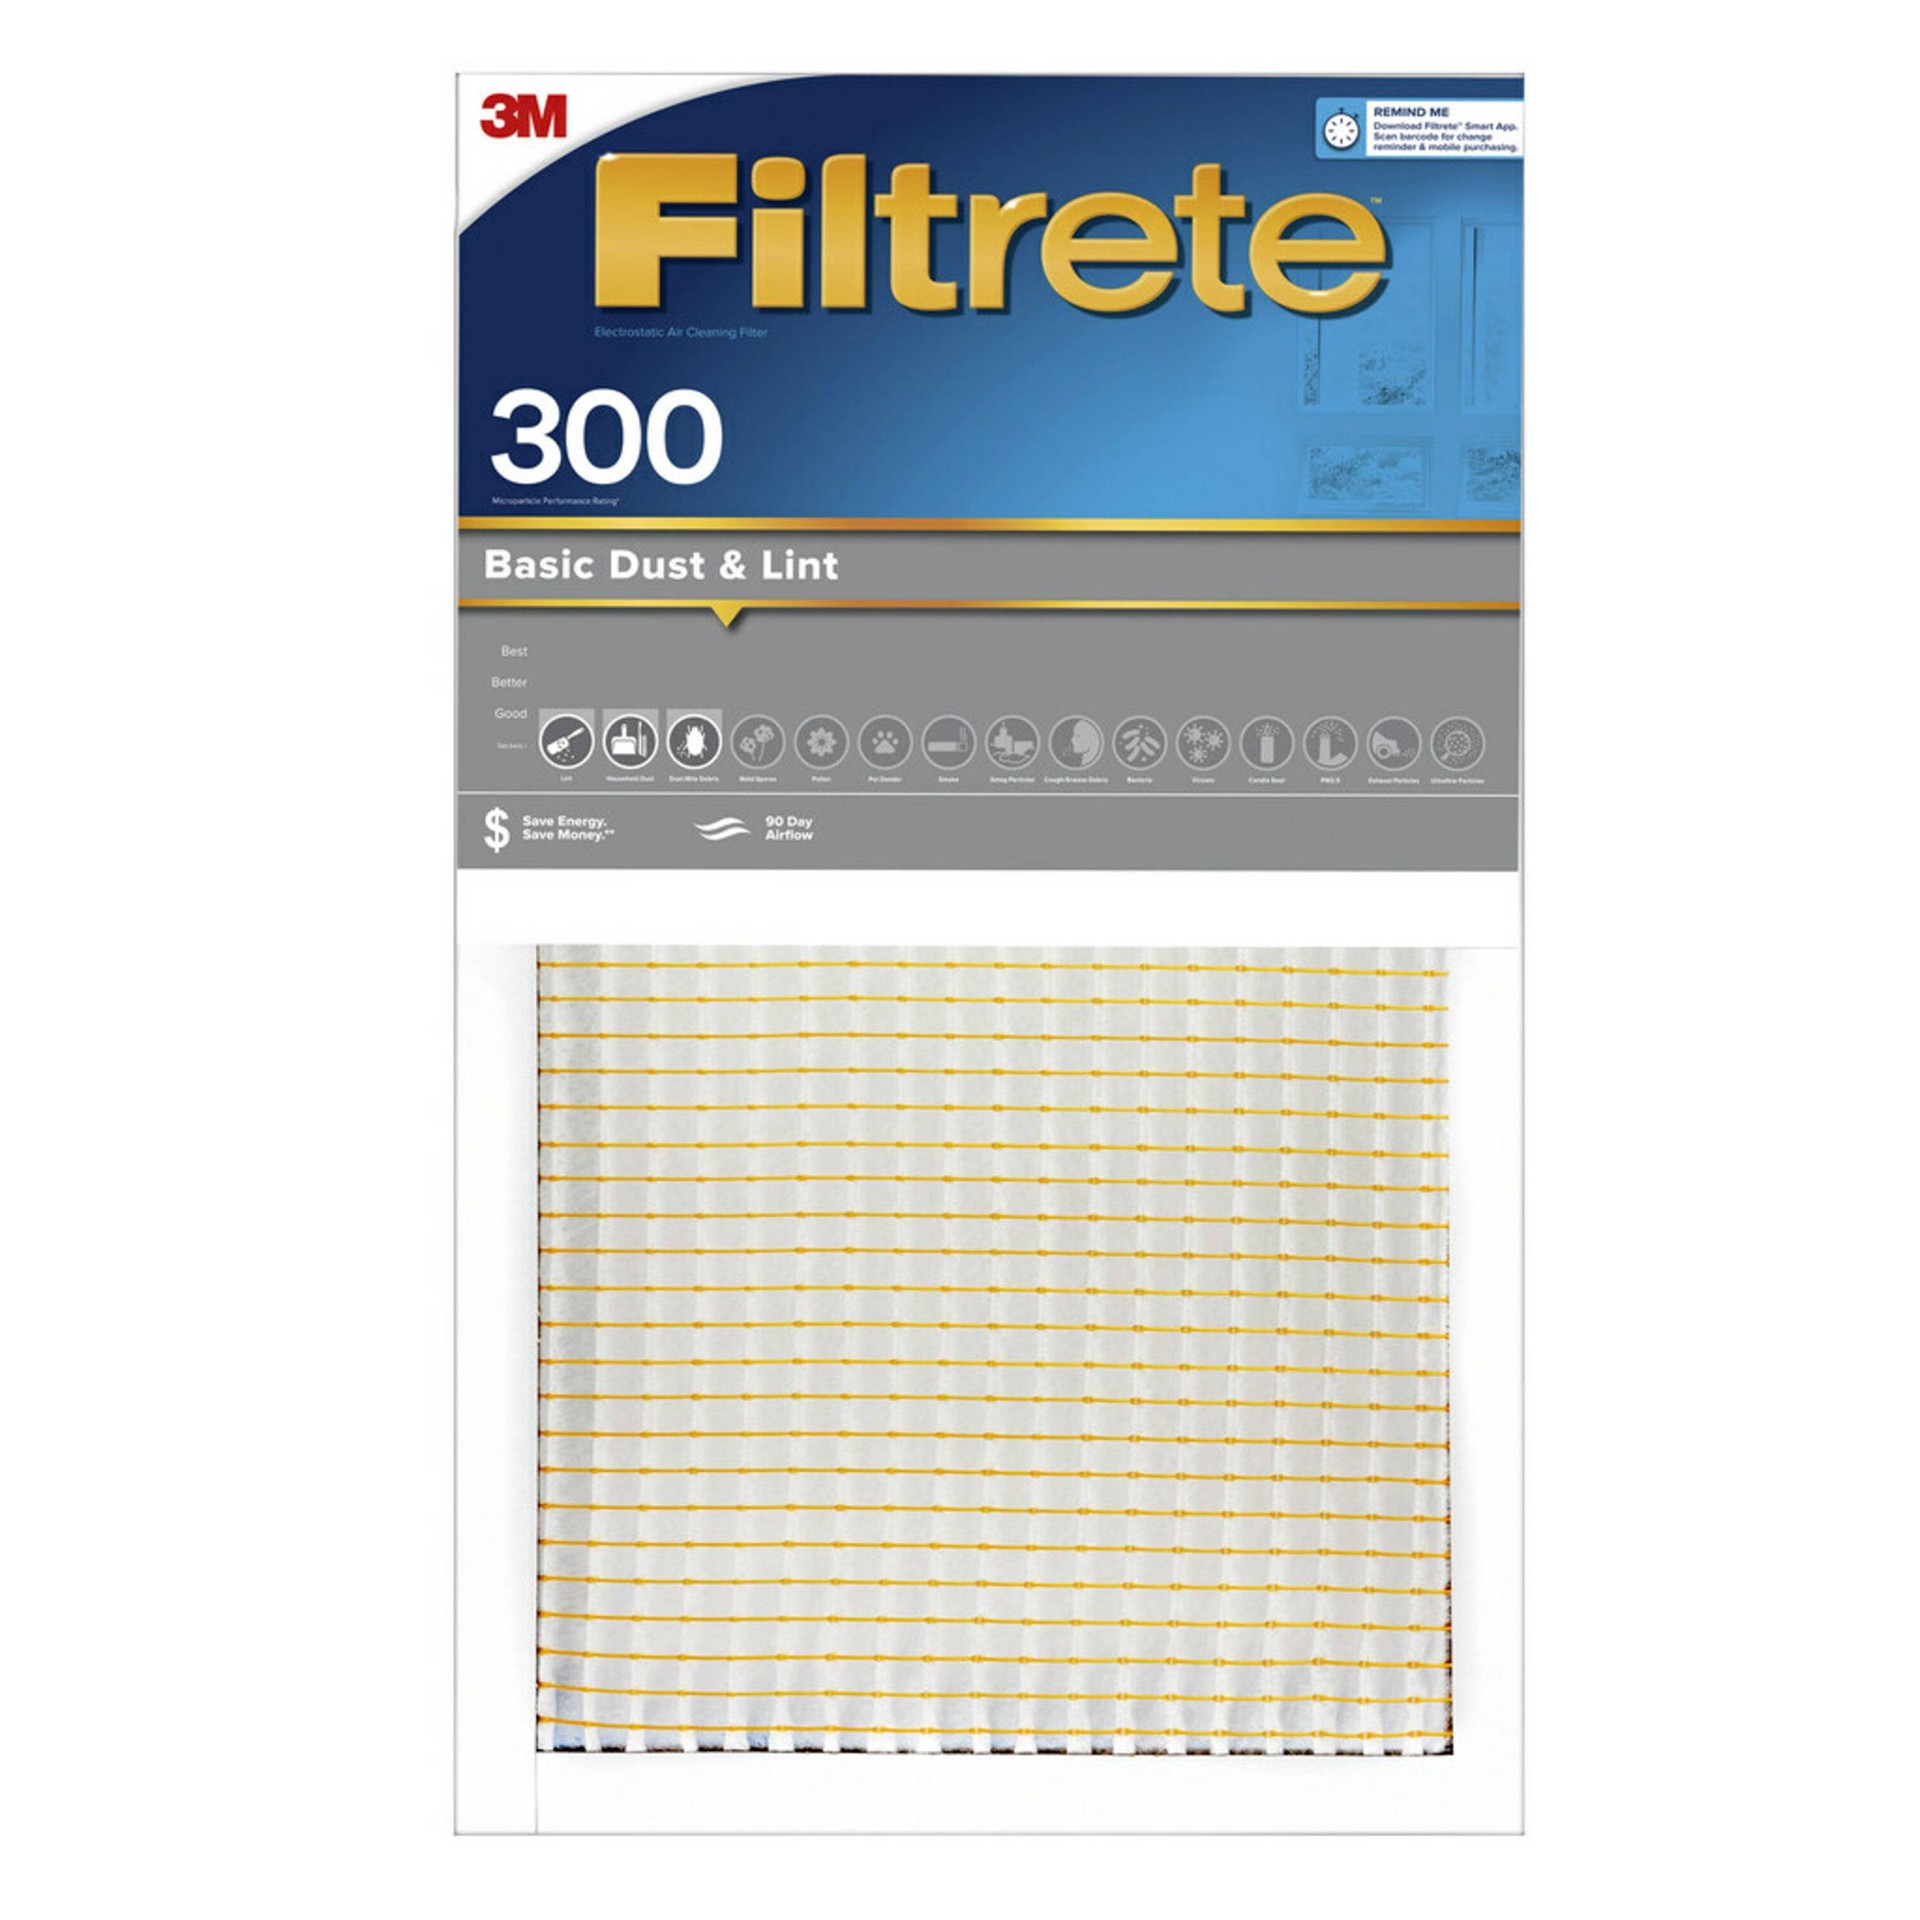 slide 1 of 1, 3M Filtrete Dust Reduction 300 High Air Flow Filter, 16 in x 25 in